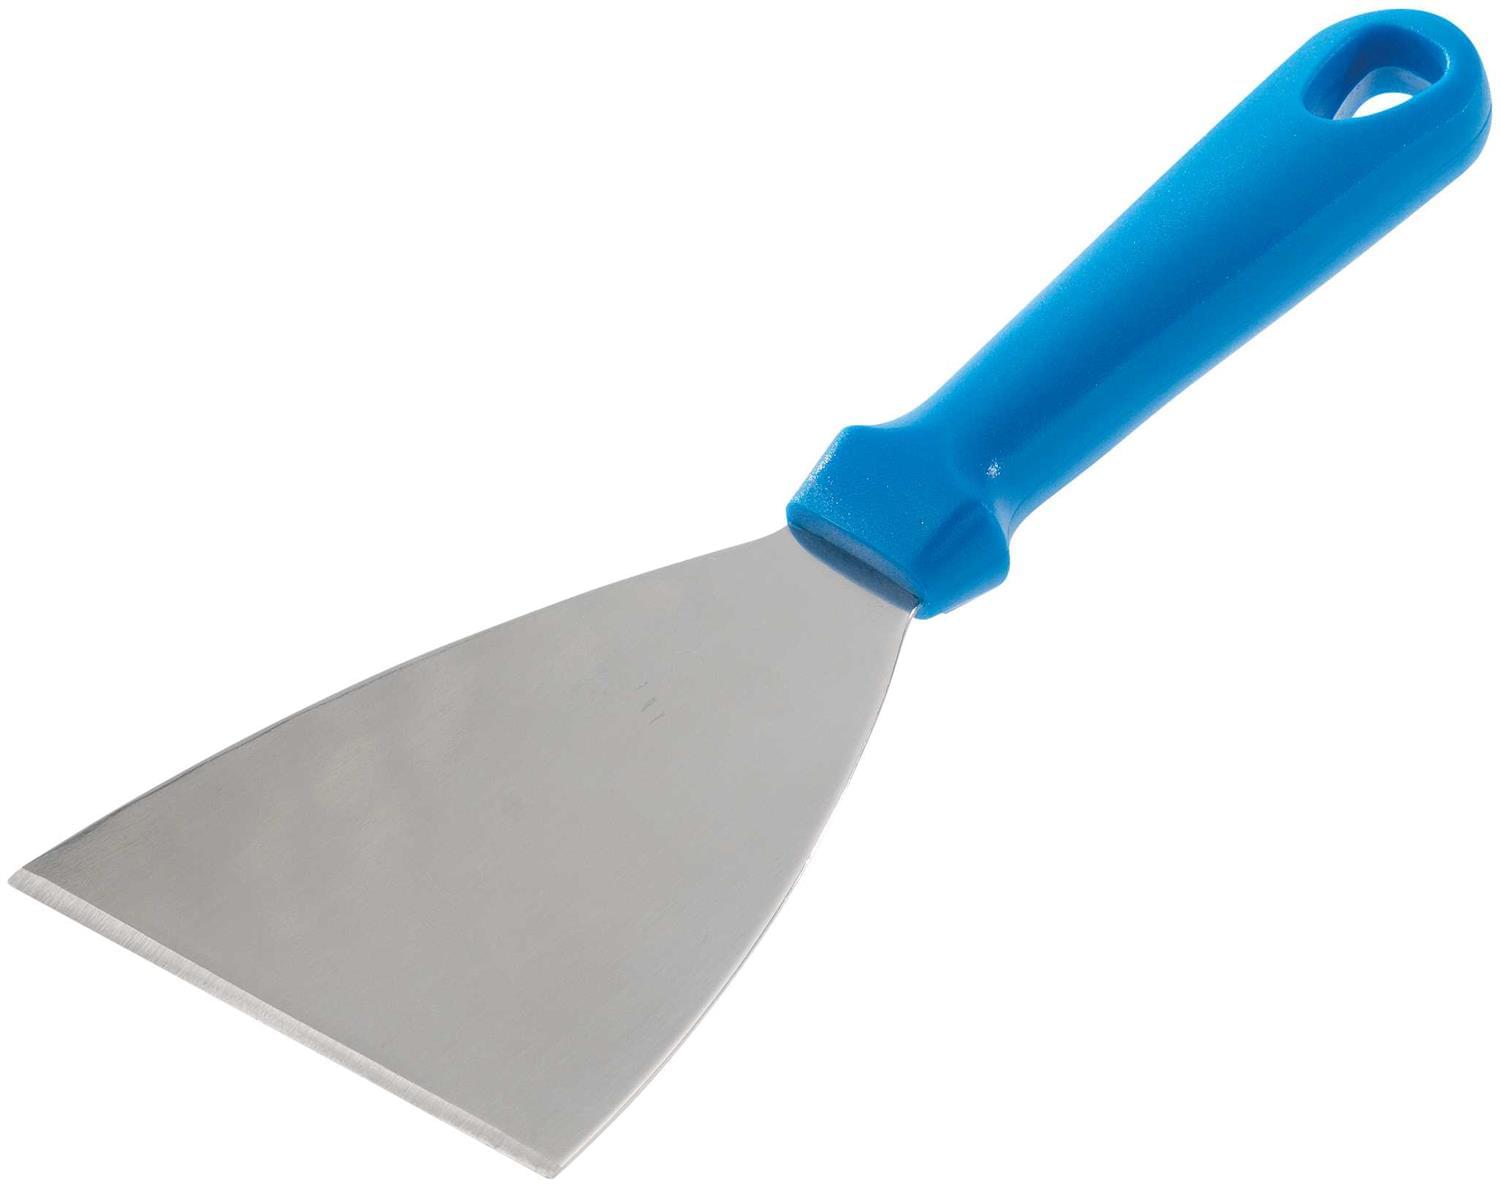 Triangular spatula with stainless steel blade 11x10cm, plastic handle